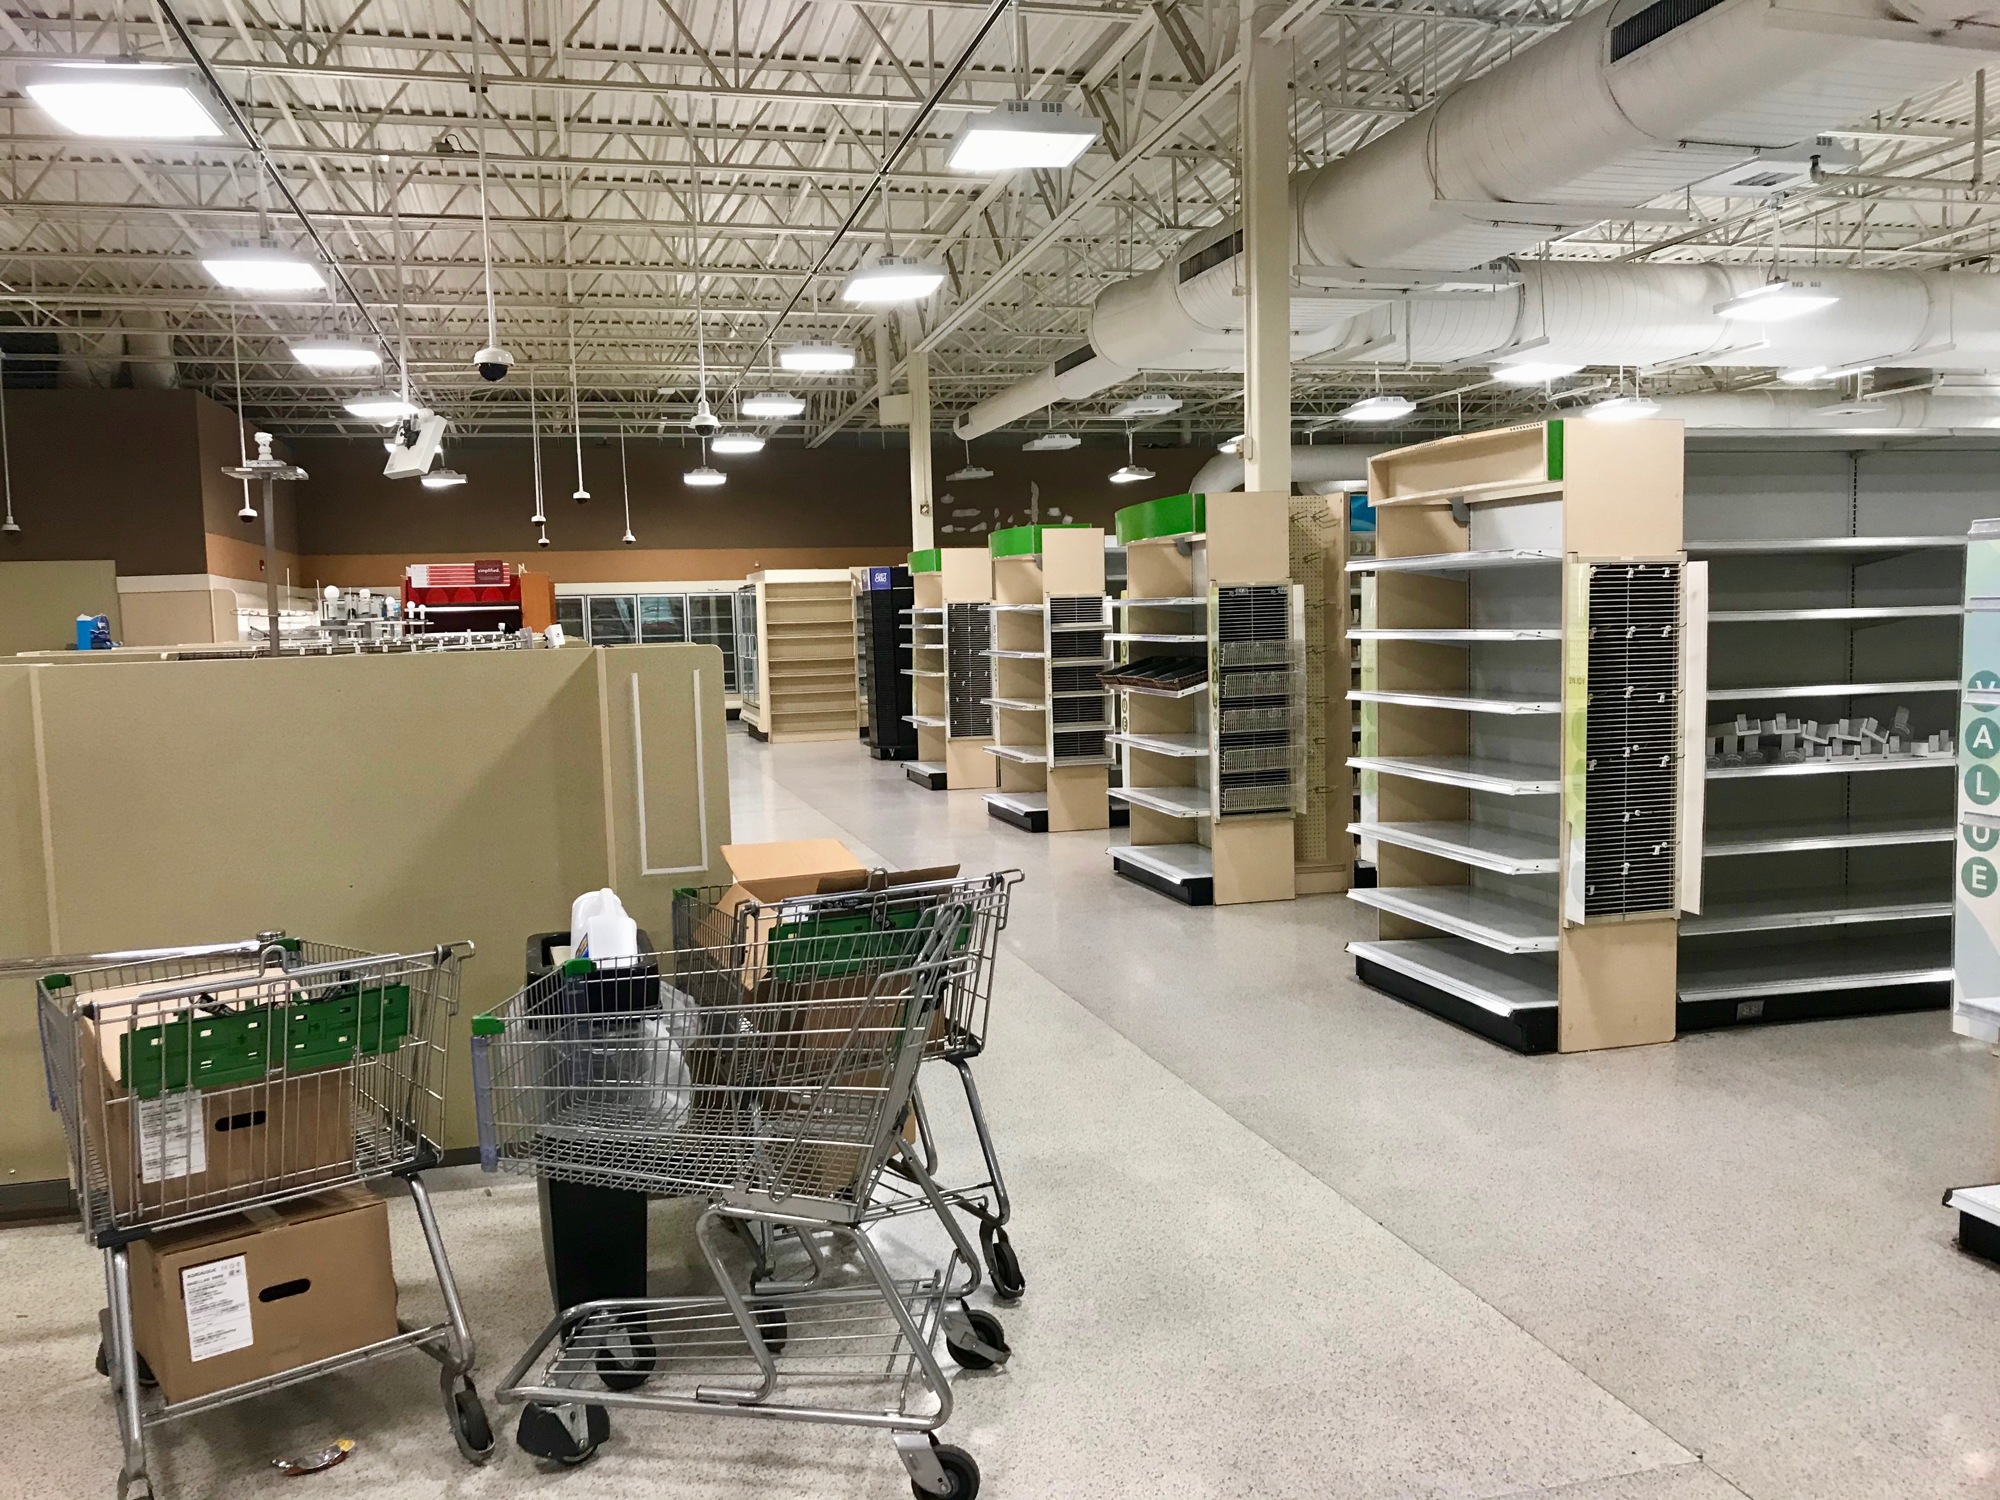 Publix left shelving, cold storage, checkout lines and other equipment when it closed in December.